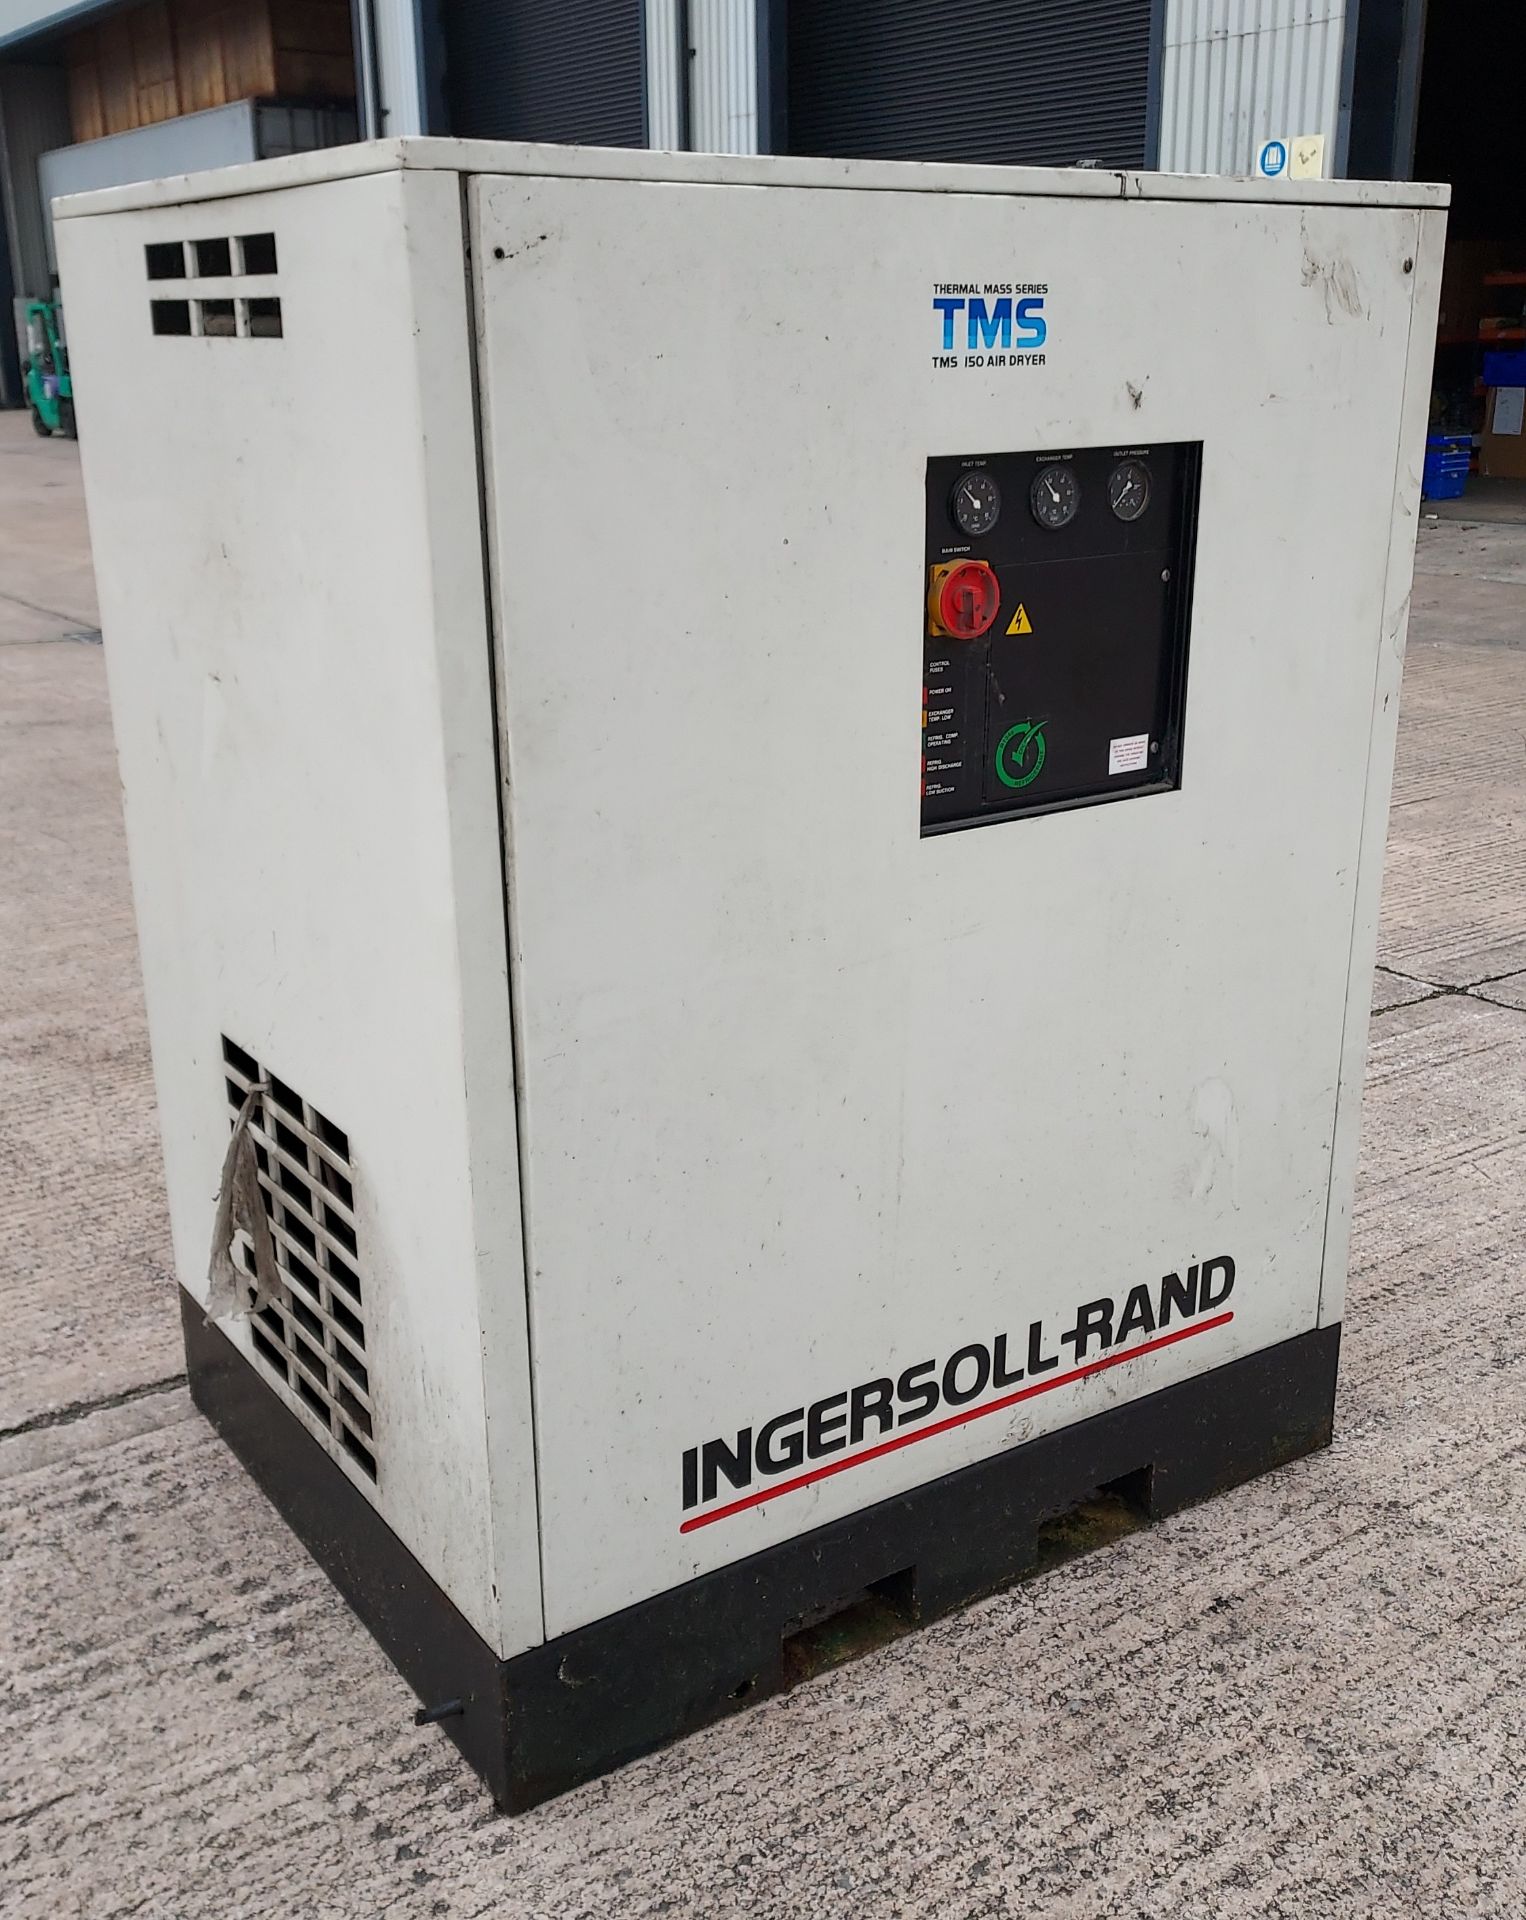 INGERSOLL RAND TMS 150 PACKAGED AIR DRYER S/N 150 9507005, 3 PHASE